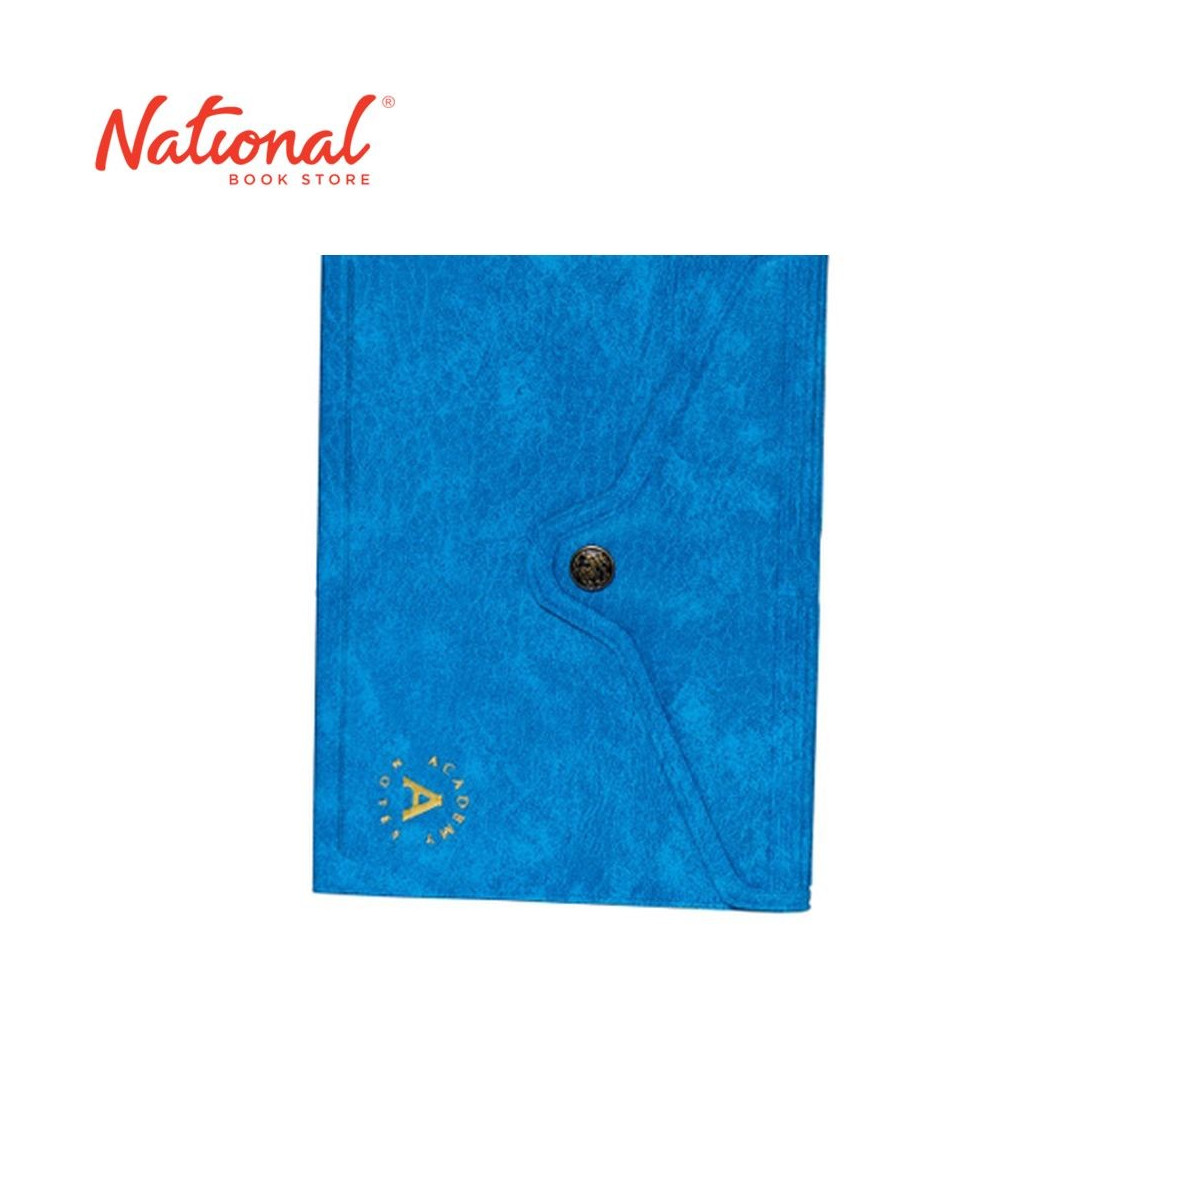 CAMPUS MATE BINDER NOTEBOOK NO. 129 MINI WITH BUTTON SNAP ACADEMY CPMT BINDER NOTEBOOK NO. 129 MINI W/BUTTON